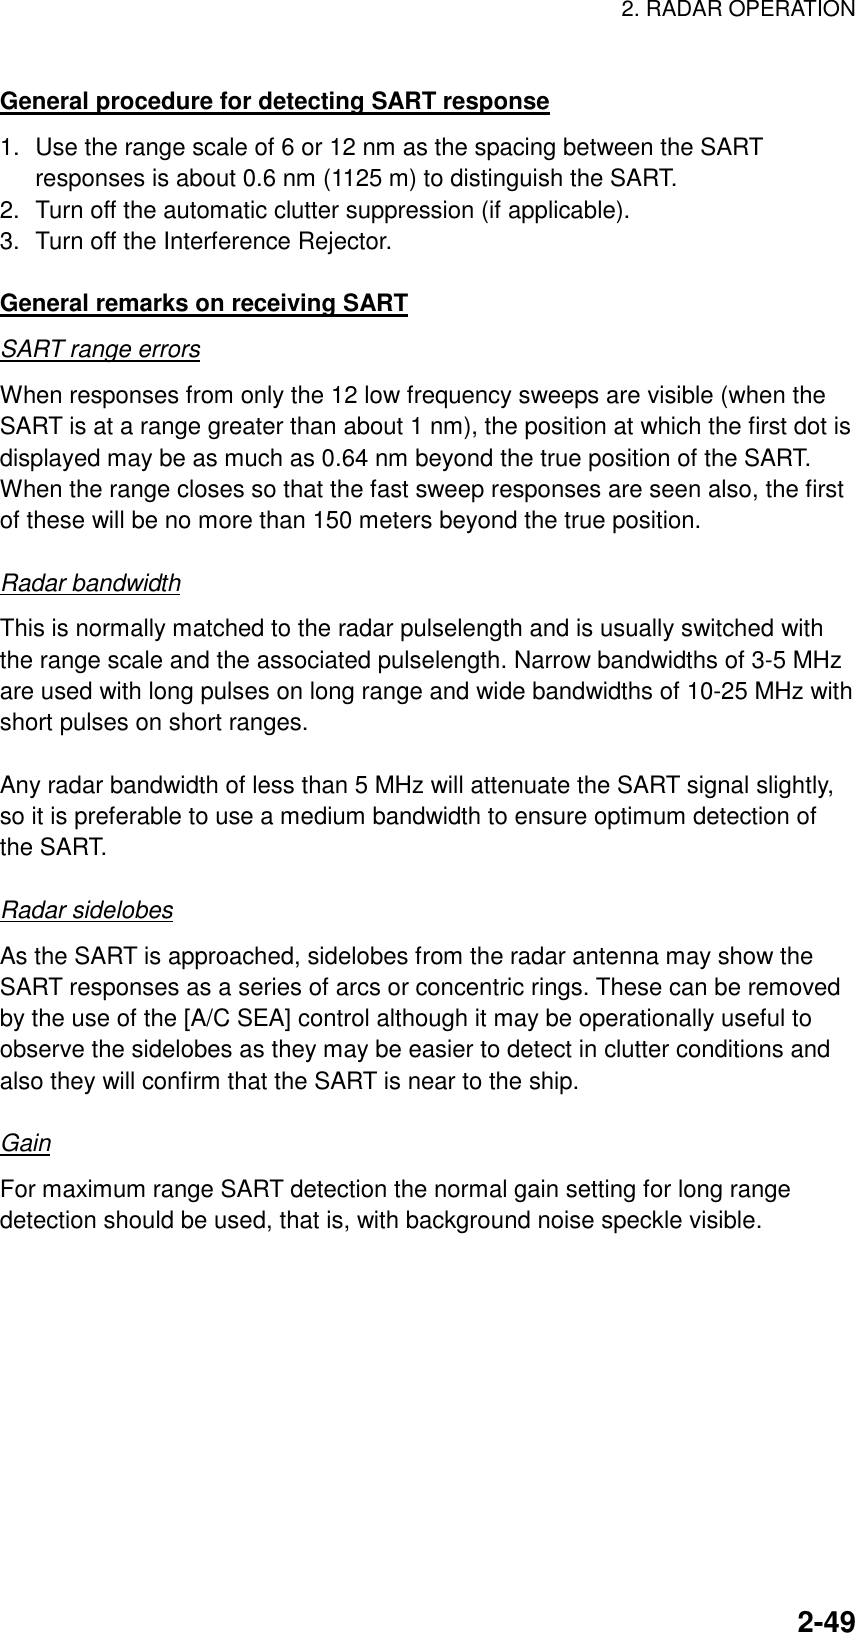 2. RADAR OPERATION    2-49General procedure for detecting SART response 1.  Use the range scale of 6 or 12 nm as the spacing between the SART responses is about 0.6 nm (1125 m) to distinguish the SART. 2.  Turn off the automatic clutter suppression (if applicable). 3.  Turn off the Interference Rejector.  General remarks on receiving SART SART range errors When responses from only the 12 low frequency sweeps are visible (when the SART is at a range greater than about 1 nm), the position at which the first dot is displayed may be as much as 0.64 nm beyond the true position of the SART. When the range closes so that the fast sweep responses are seen also, the first of these will be no more than 150 meters beyond the true position.  Radar bandwidth This is normally matched to the radar pulselength and is usually switched with the range scale and the associated pulselength. Narrow bandwidths of 3-5 MHz are used with long pulses on long range and wide bandwidths of 10-25 MHz with short pulses on short ranges.  Any radar bandwidth of less than 5 MHz will attenuate the SART signal slightly, so it is preferable to use a medium bandwidth to ensure optimum detection of the SART.    Radar sidelobes As the SART is approached, sidelobes from the radar antenna may show the SART responses as a series of arcs or concentric rings. These can be removed by the use of the [A/C SEA] control although it may be operationally useful to observe the sidelobes as they may be easier to detect in clutter conditions and also they will confirm that the SART is near to the ship.  Gain For maximum range SART detection the normal gain setting for long range detection should be used, that is, with background noise speckle visible.  